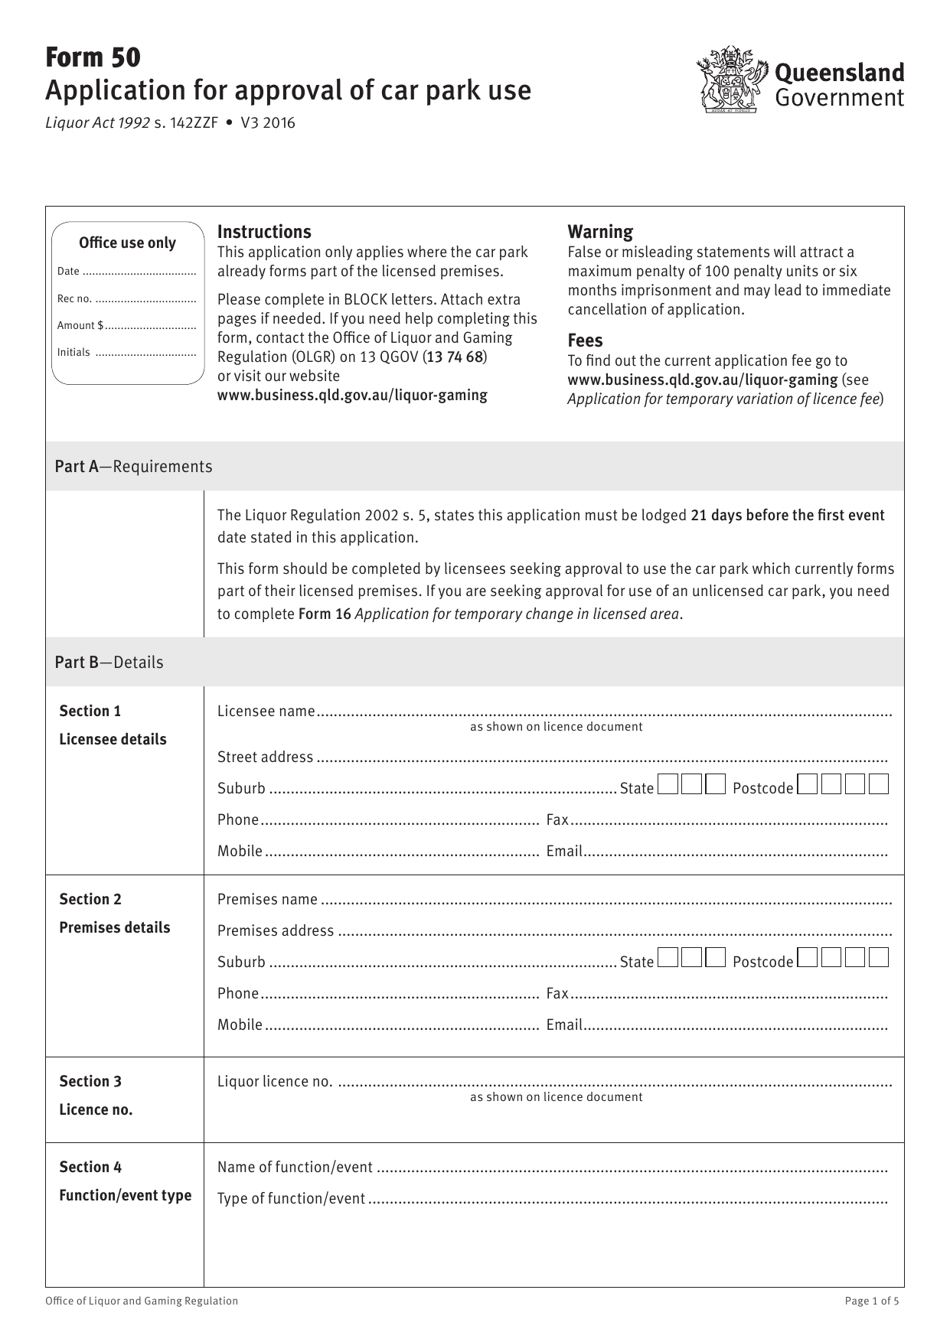 Form 50 Application for Approval of Car Park Use - Queensland, Australia, Page 1